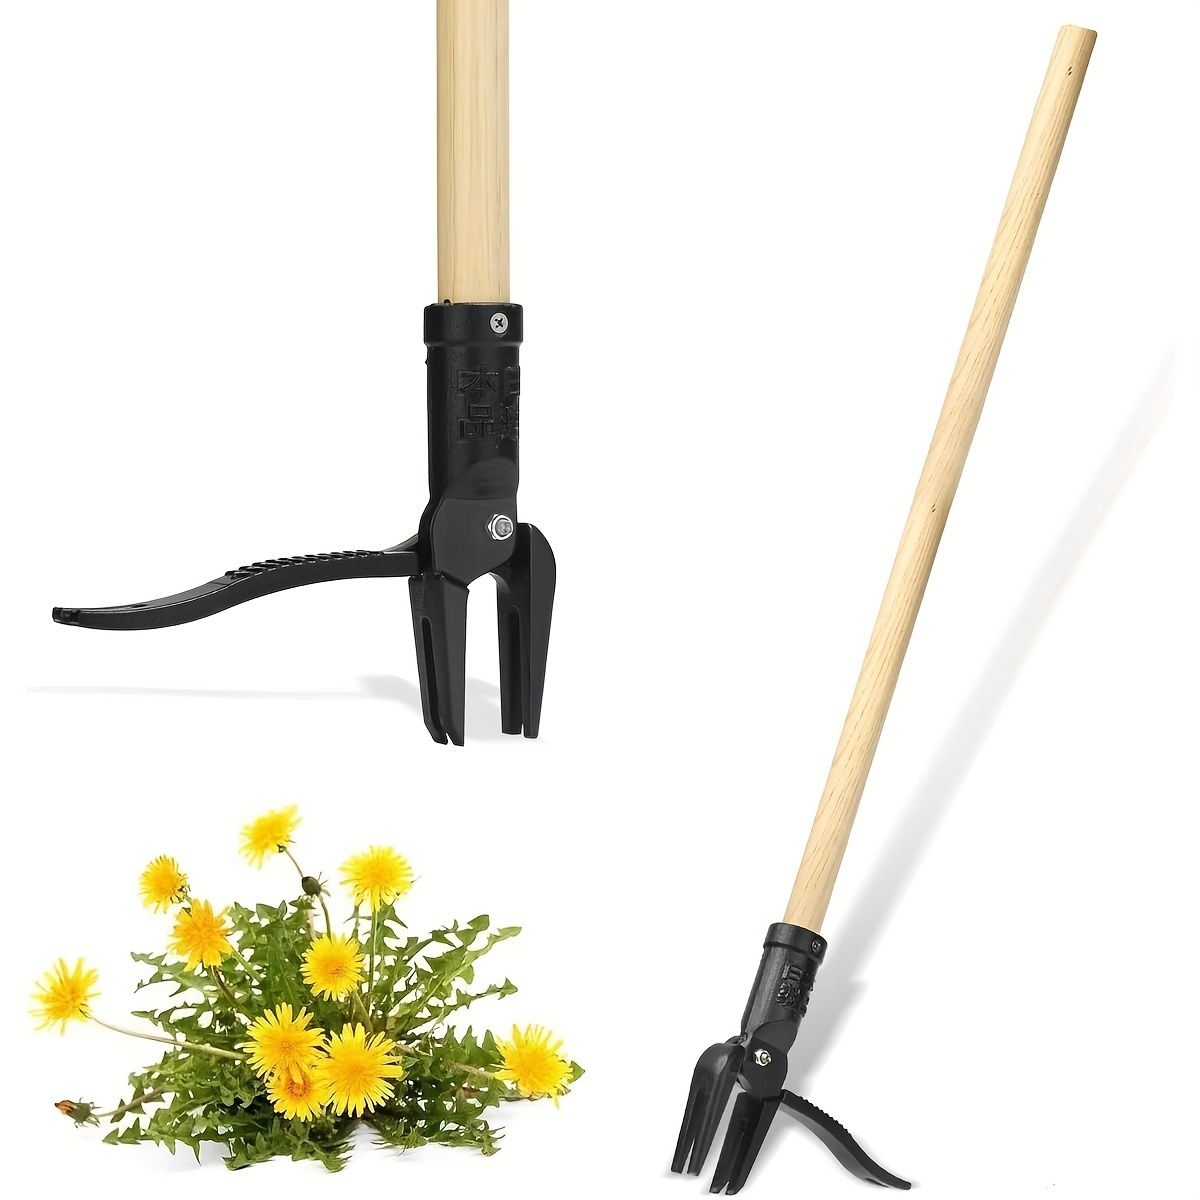 

Puller Tool Stand Up Heavy Duty Weeding Tool With Long Wooden Handle And 4-claw Steel Head, Easily Remove Weeds Without Bending, Pulling, Or Kneeling